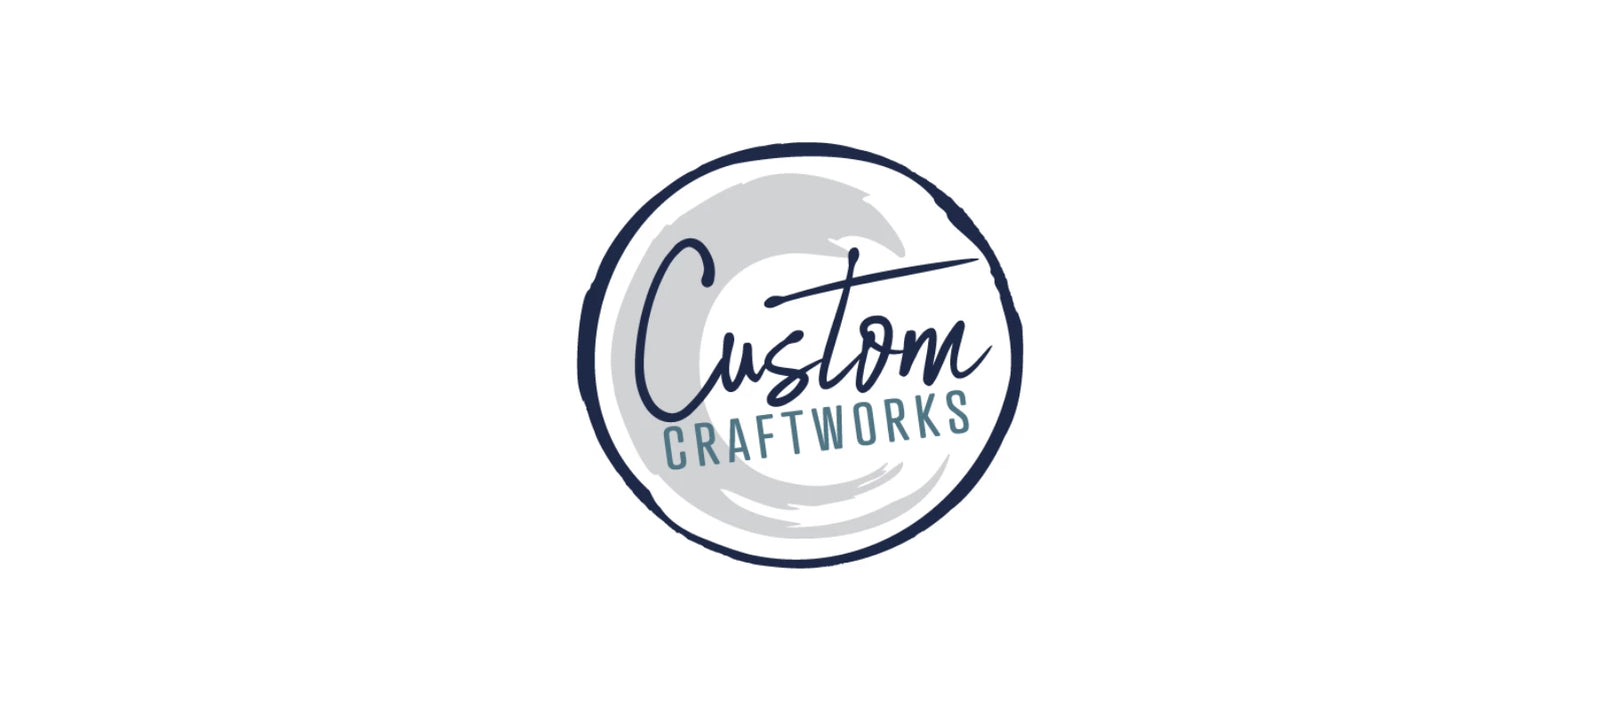 ChairsThatGive.com is an authorized dealer of Custom Craftworks